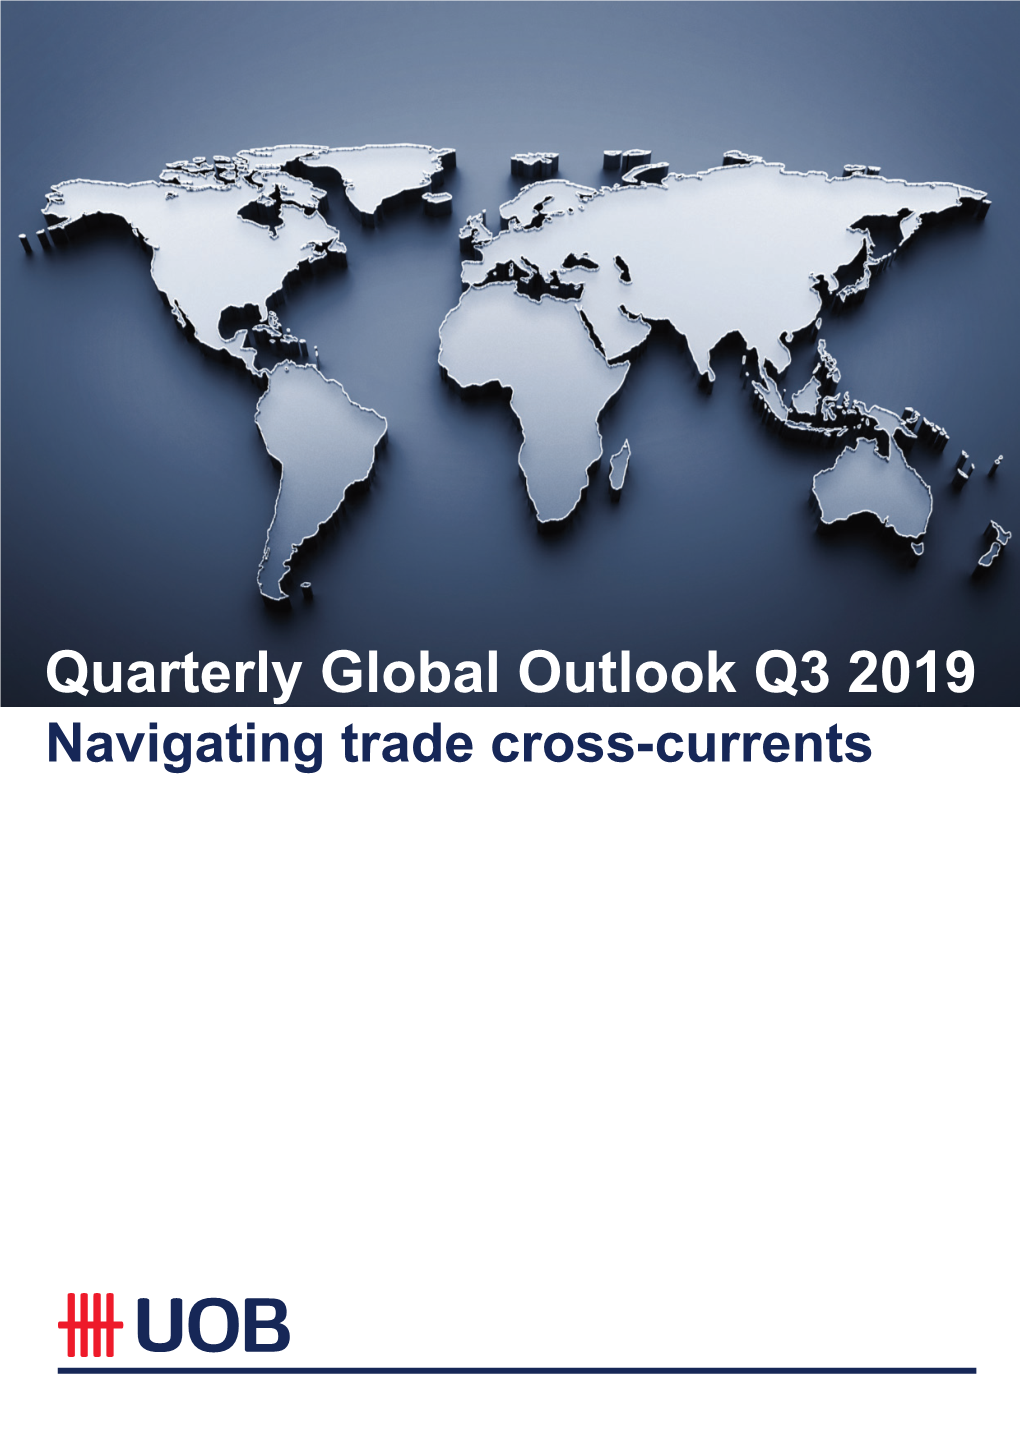 Quarterly Global Outlook Q3 2019 Navigating Trade Cross-Currents CONTENT